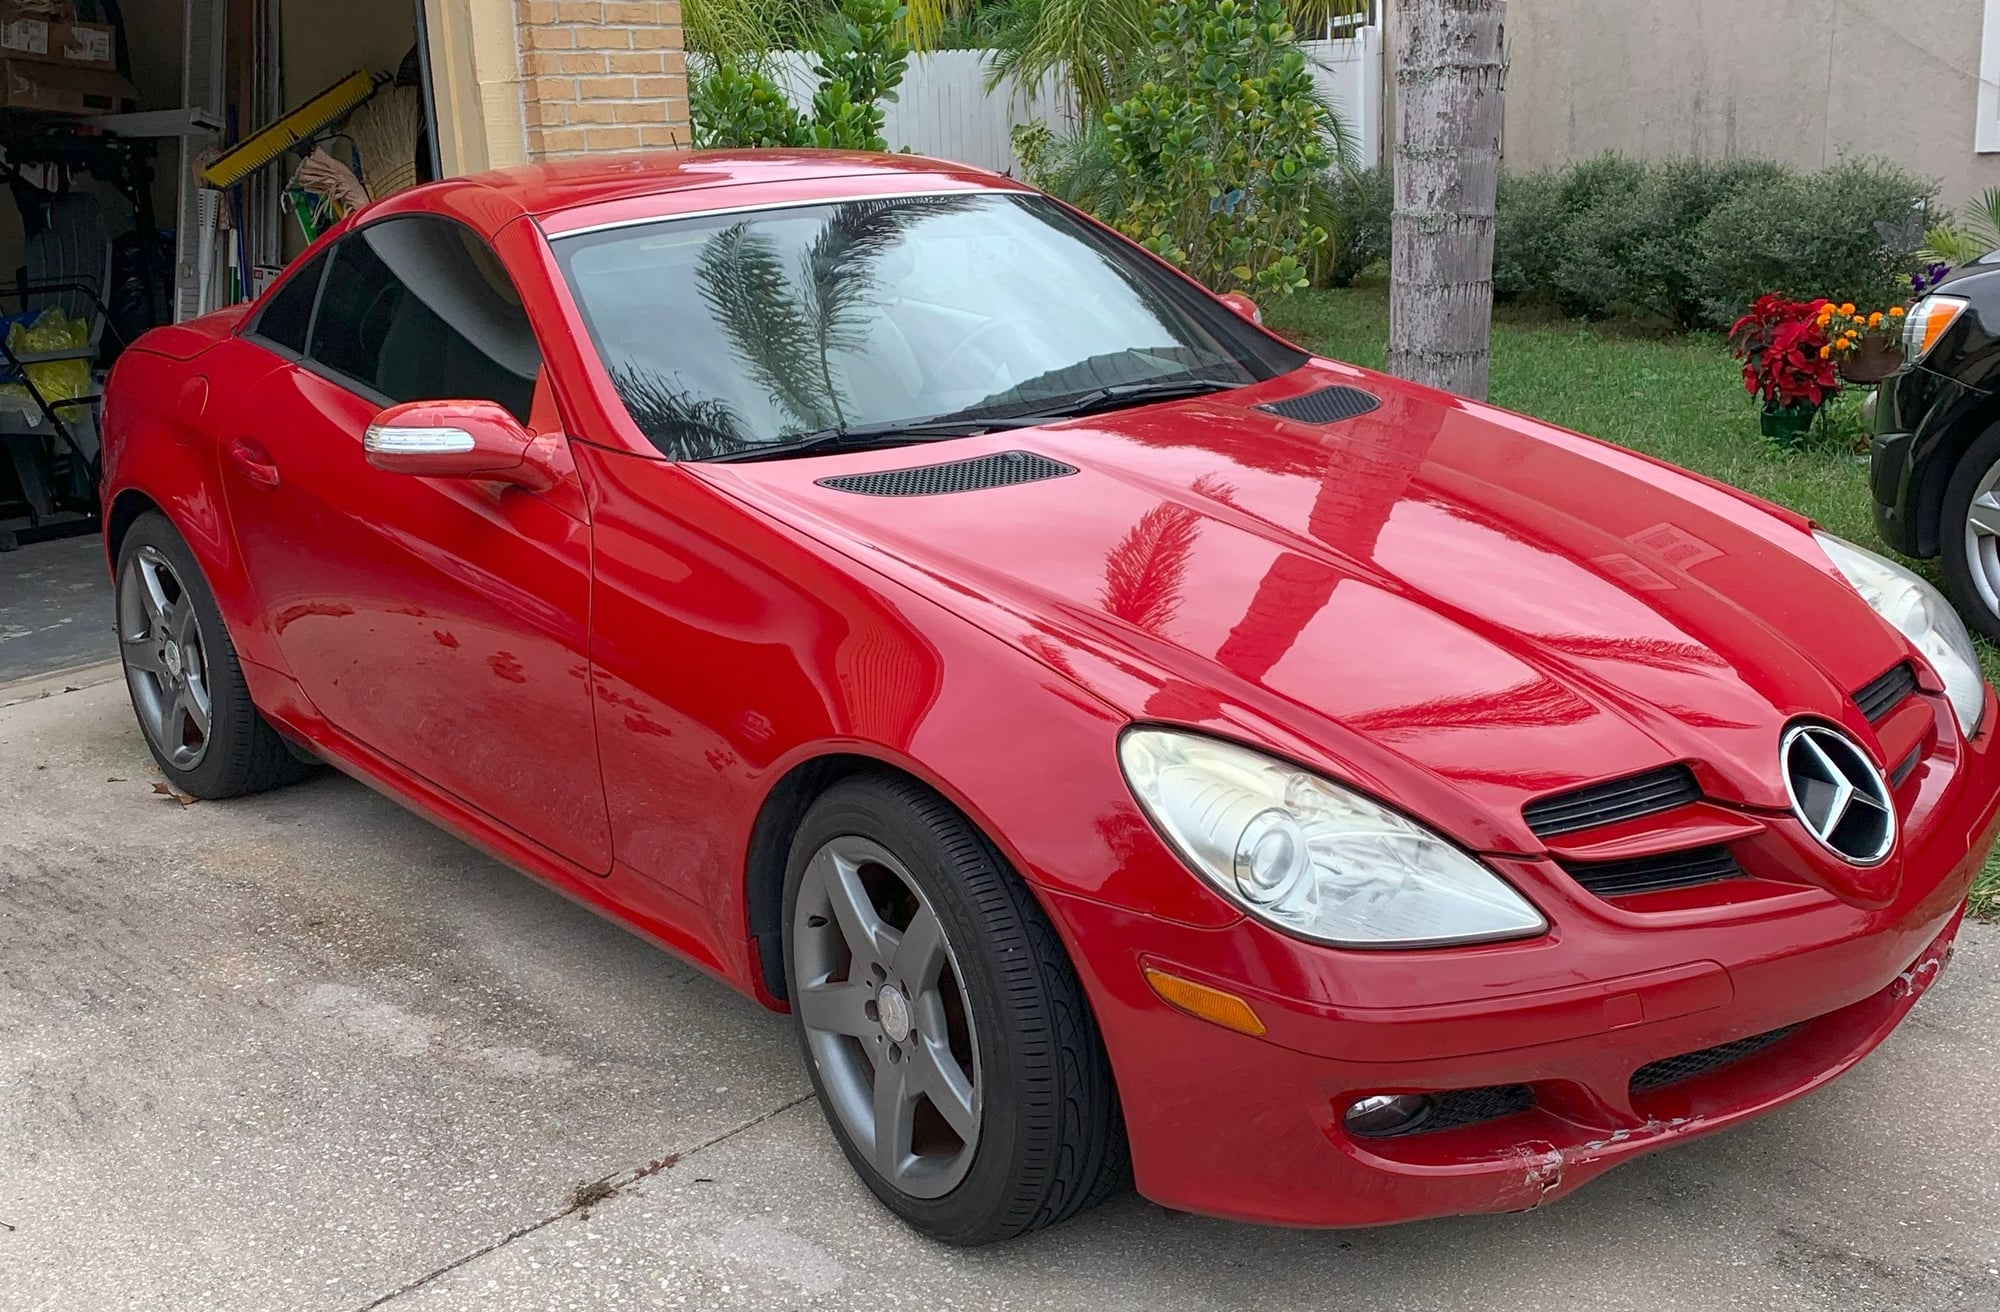 2006 Mercedes-Benz SLK280 - 2006 SLK-280  selling: $7400.00 USD - Used - VIN WDBWK54F96F123851 - 97,000 Miles - 6 cyl - 2WD - Automatic - Convertible - Red - Orlando, FL 32765, United States